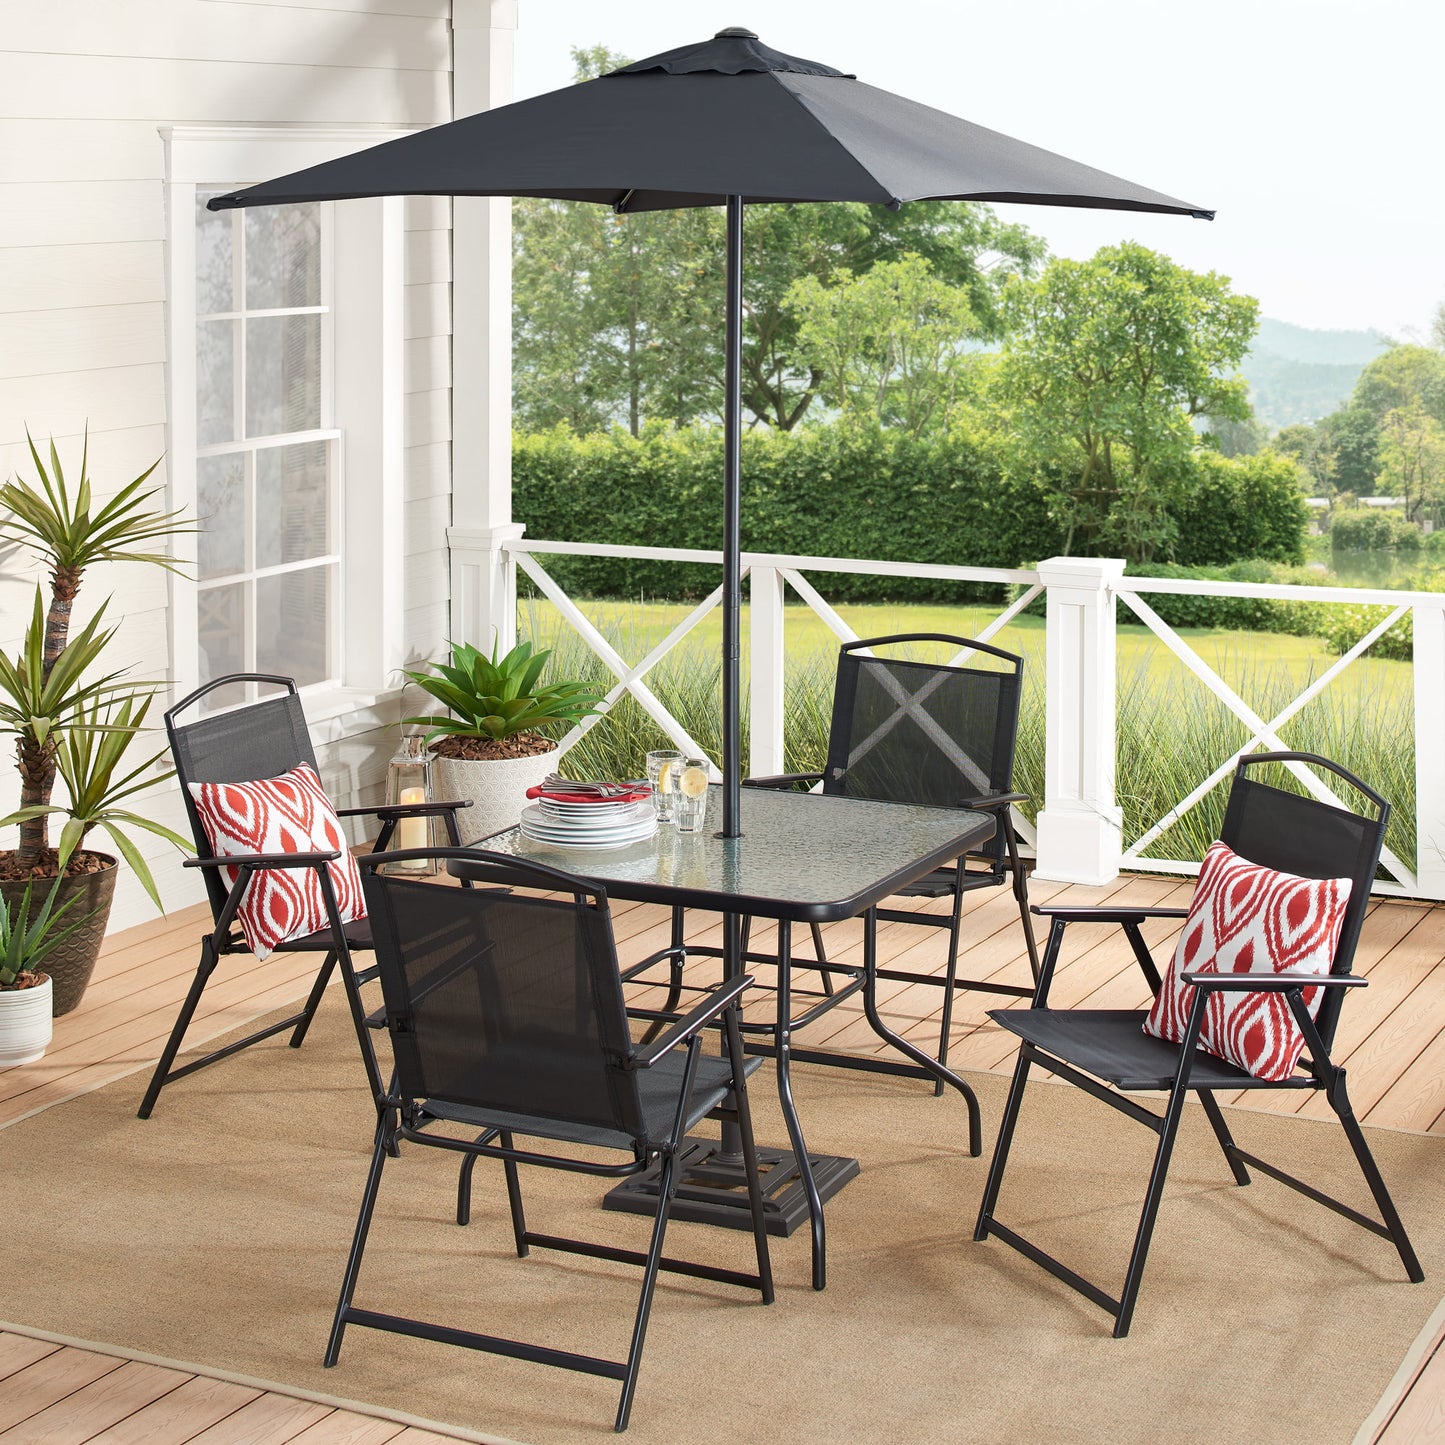 Mainstays Albany Lane 6 Piece Outdoor Patio Tables Chairs Set - youronestopstore23